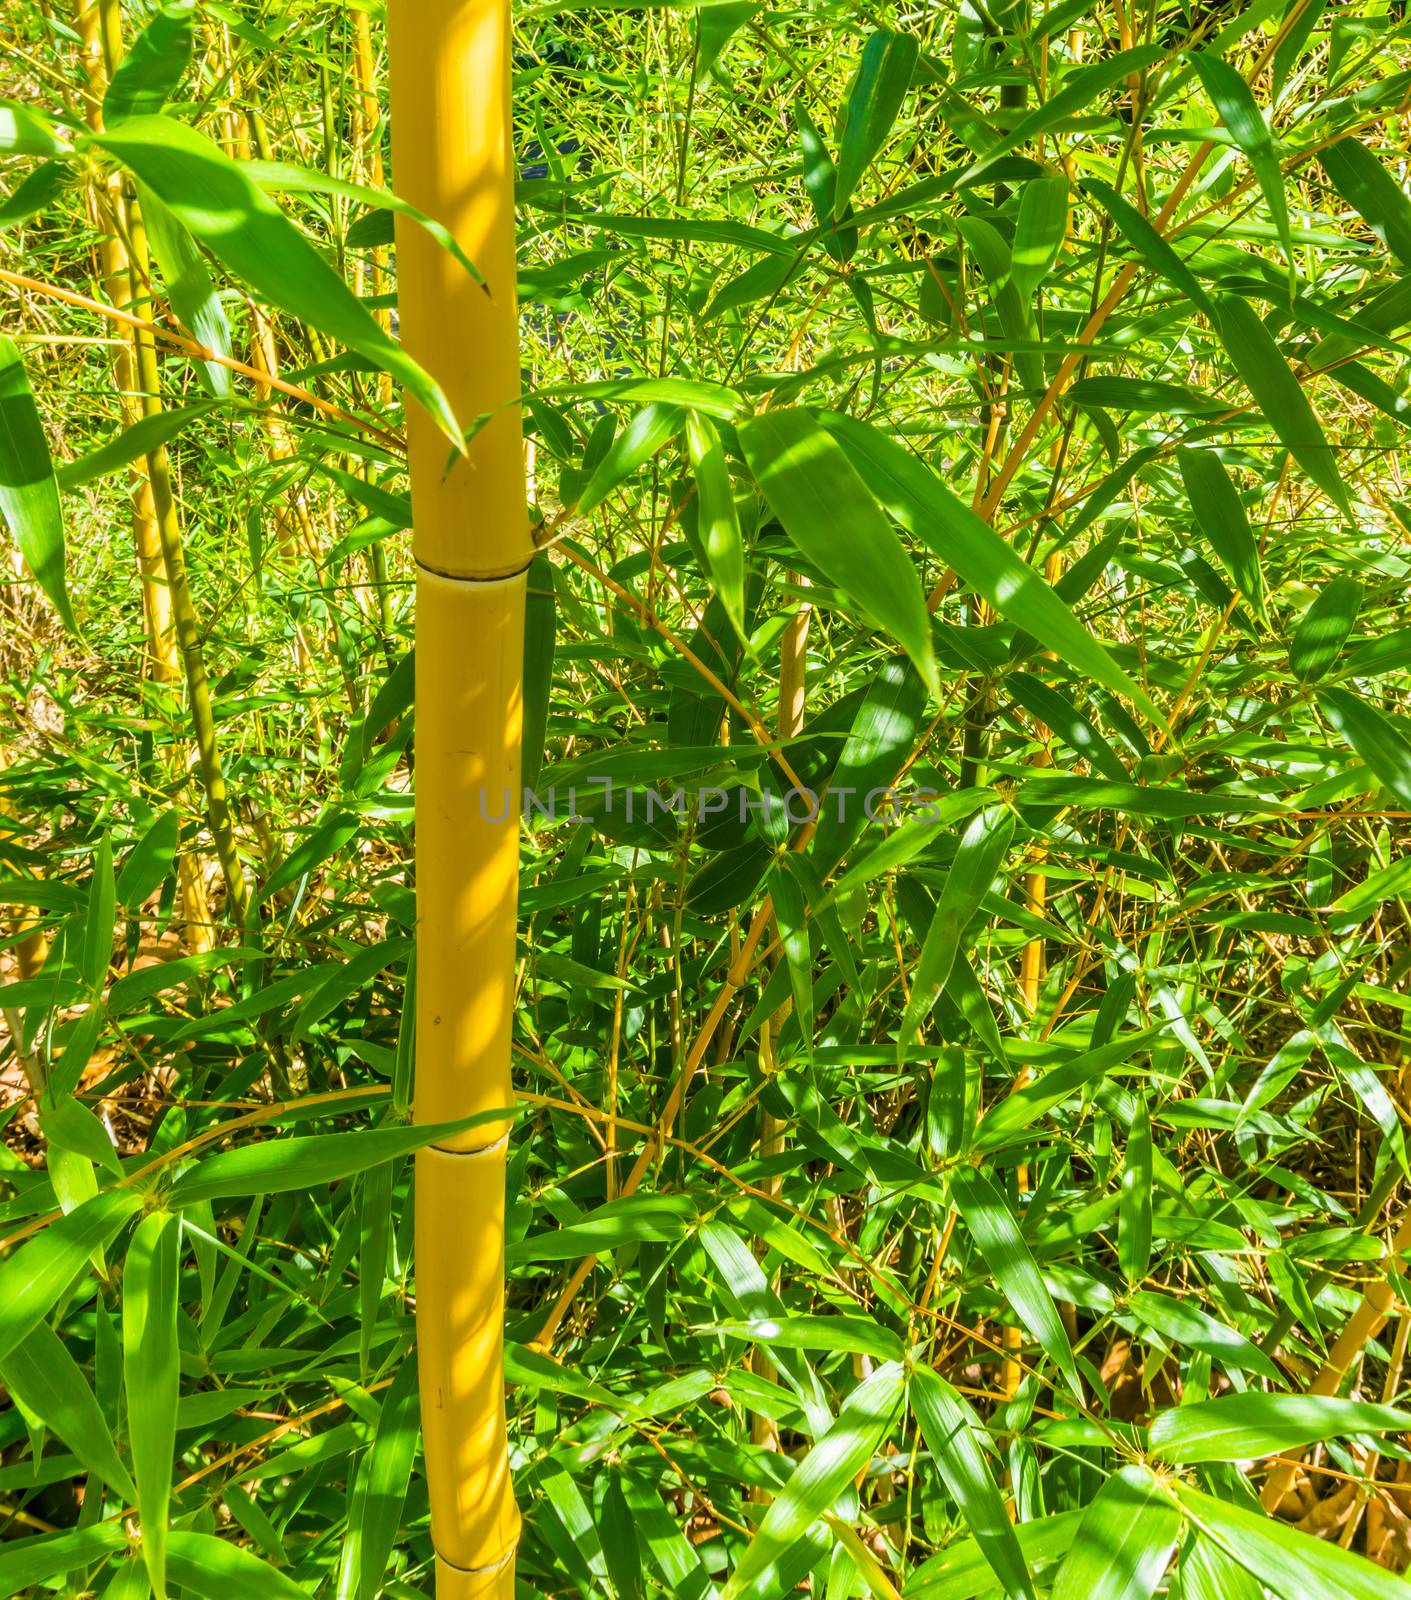 Bamboo plant tree trunk with green leaves close up textured background